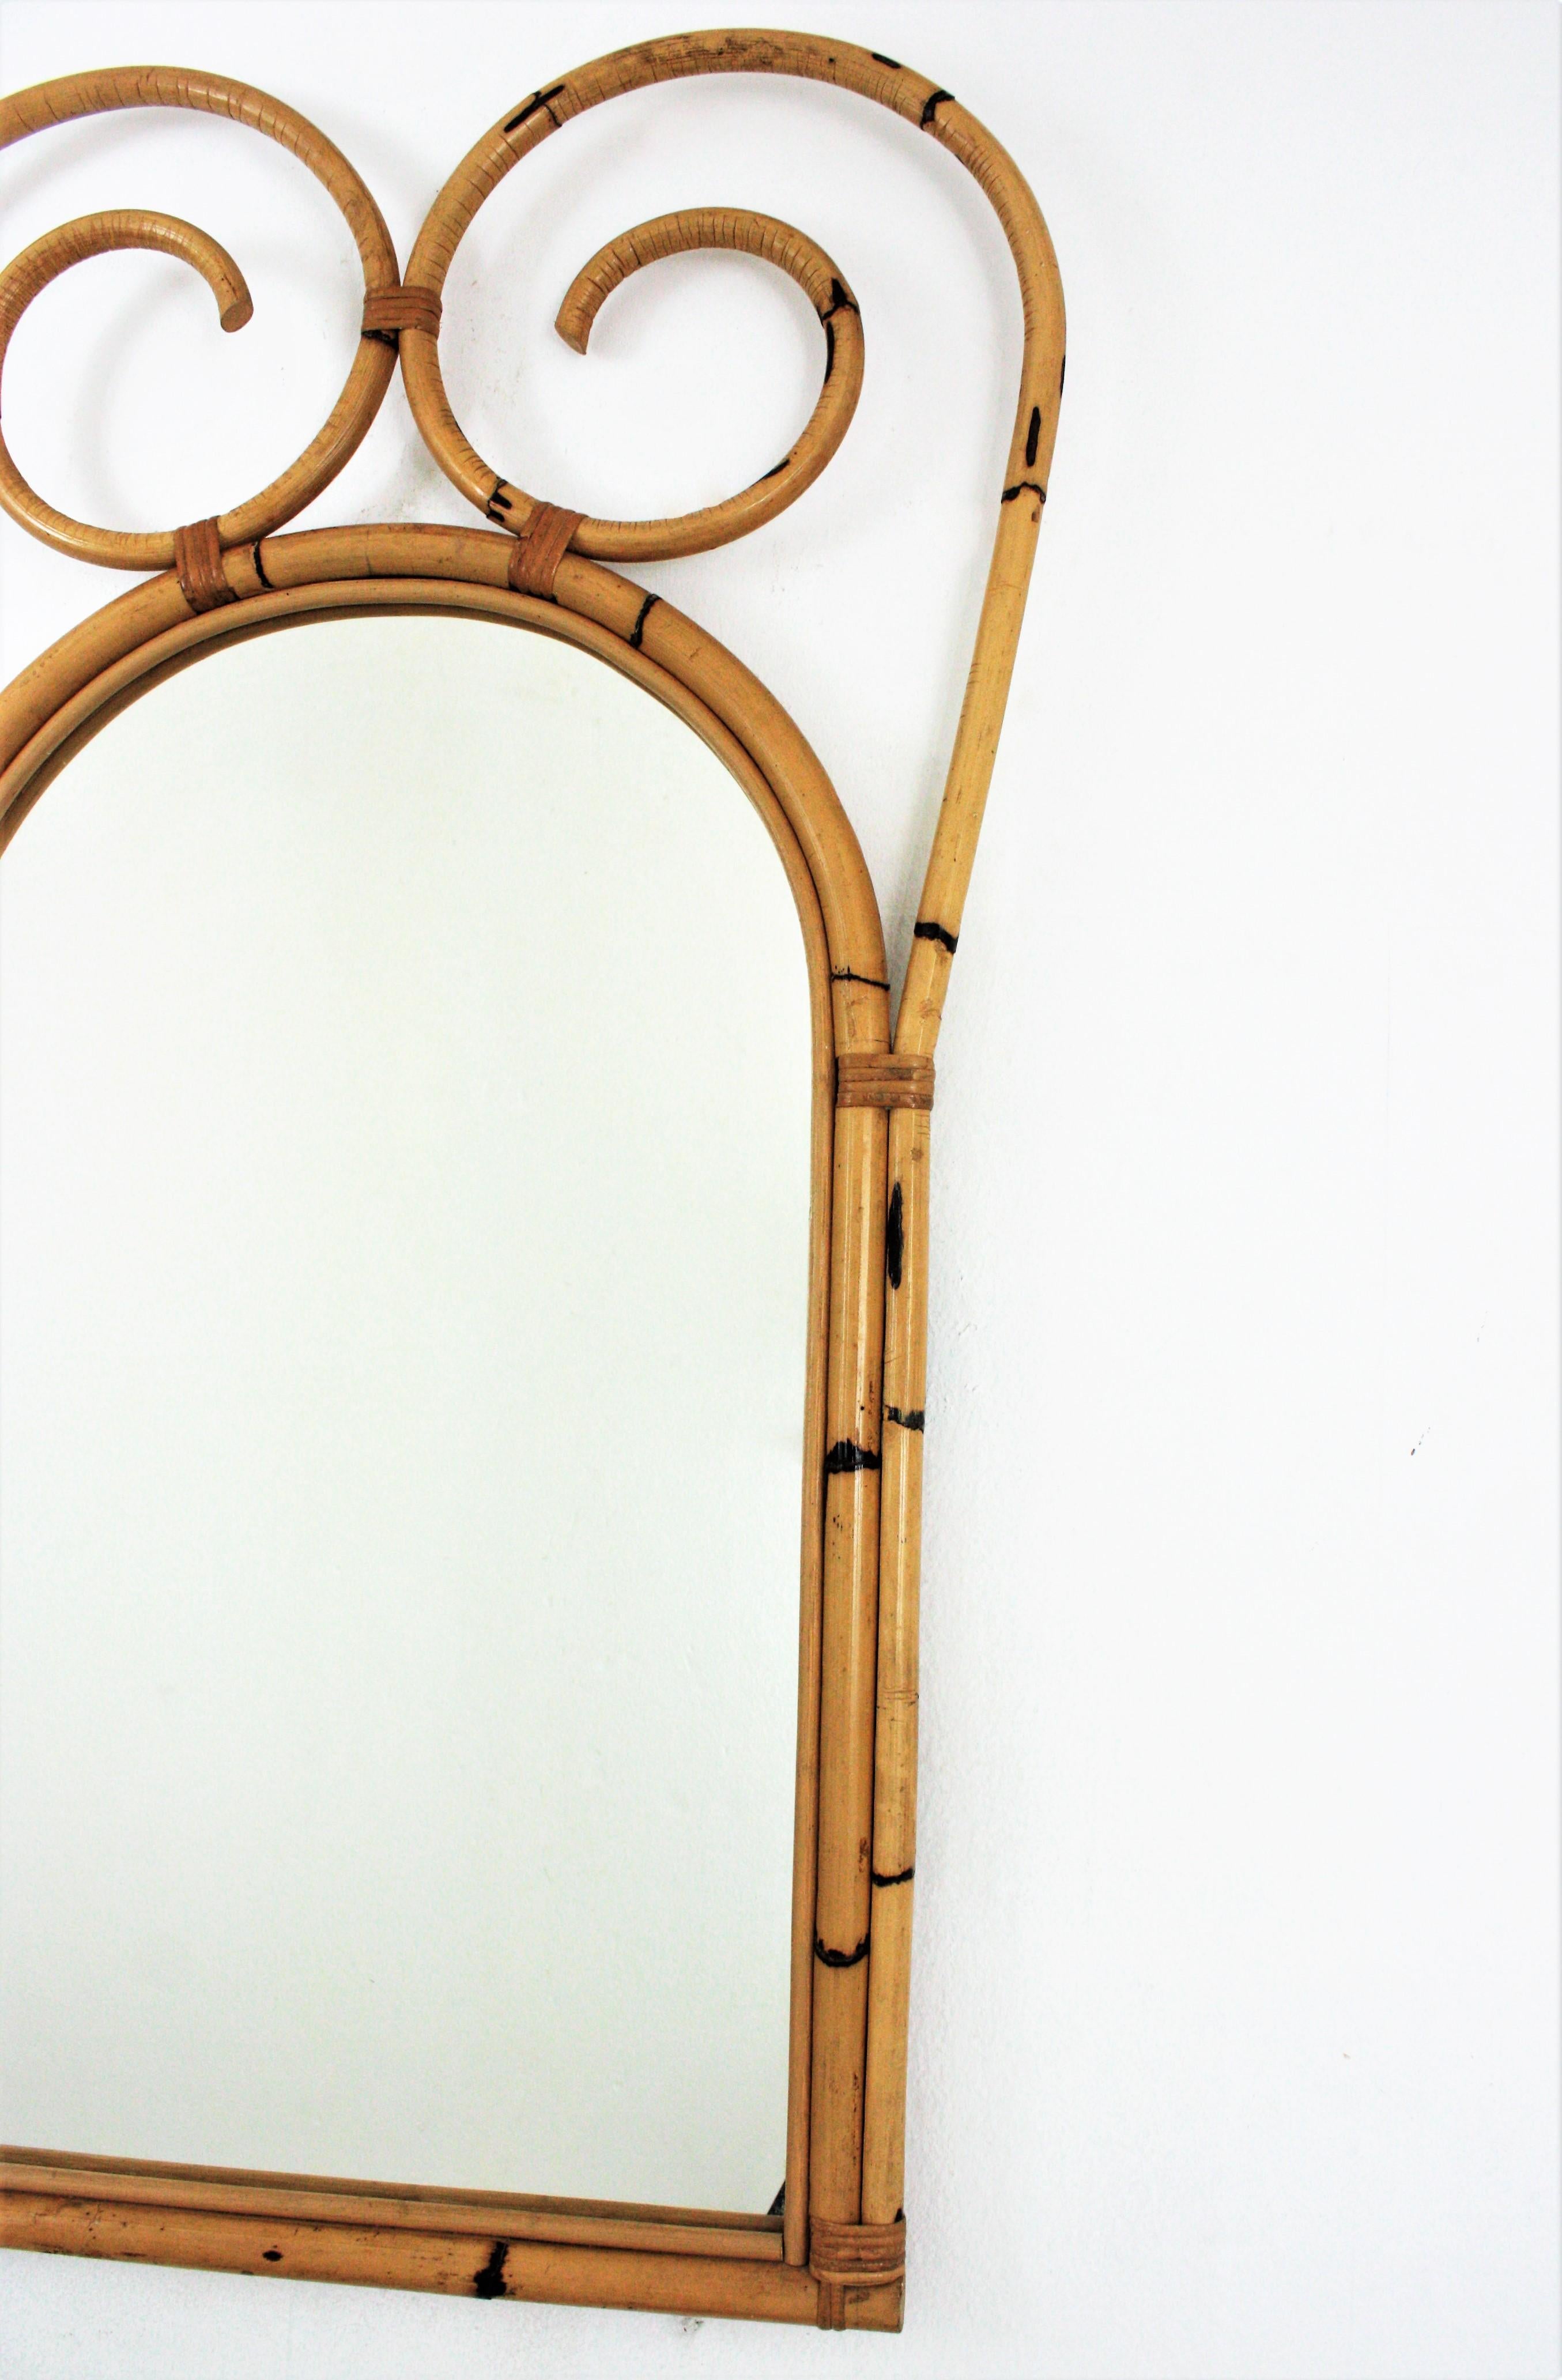 Mid-Century Modern Large Rattan Bamboo Wall Mirror with Scroll Top, Italian Designer, 1950s For Sale